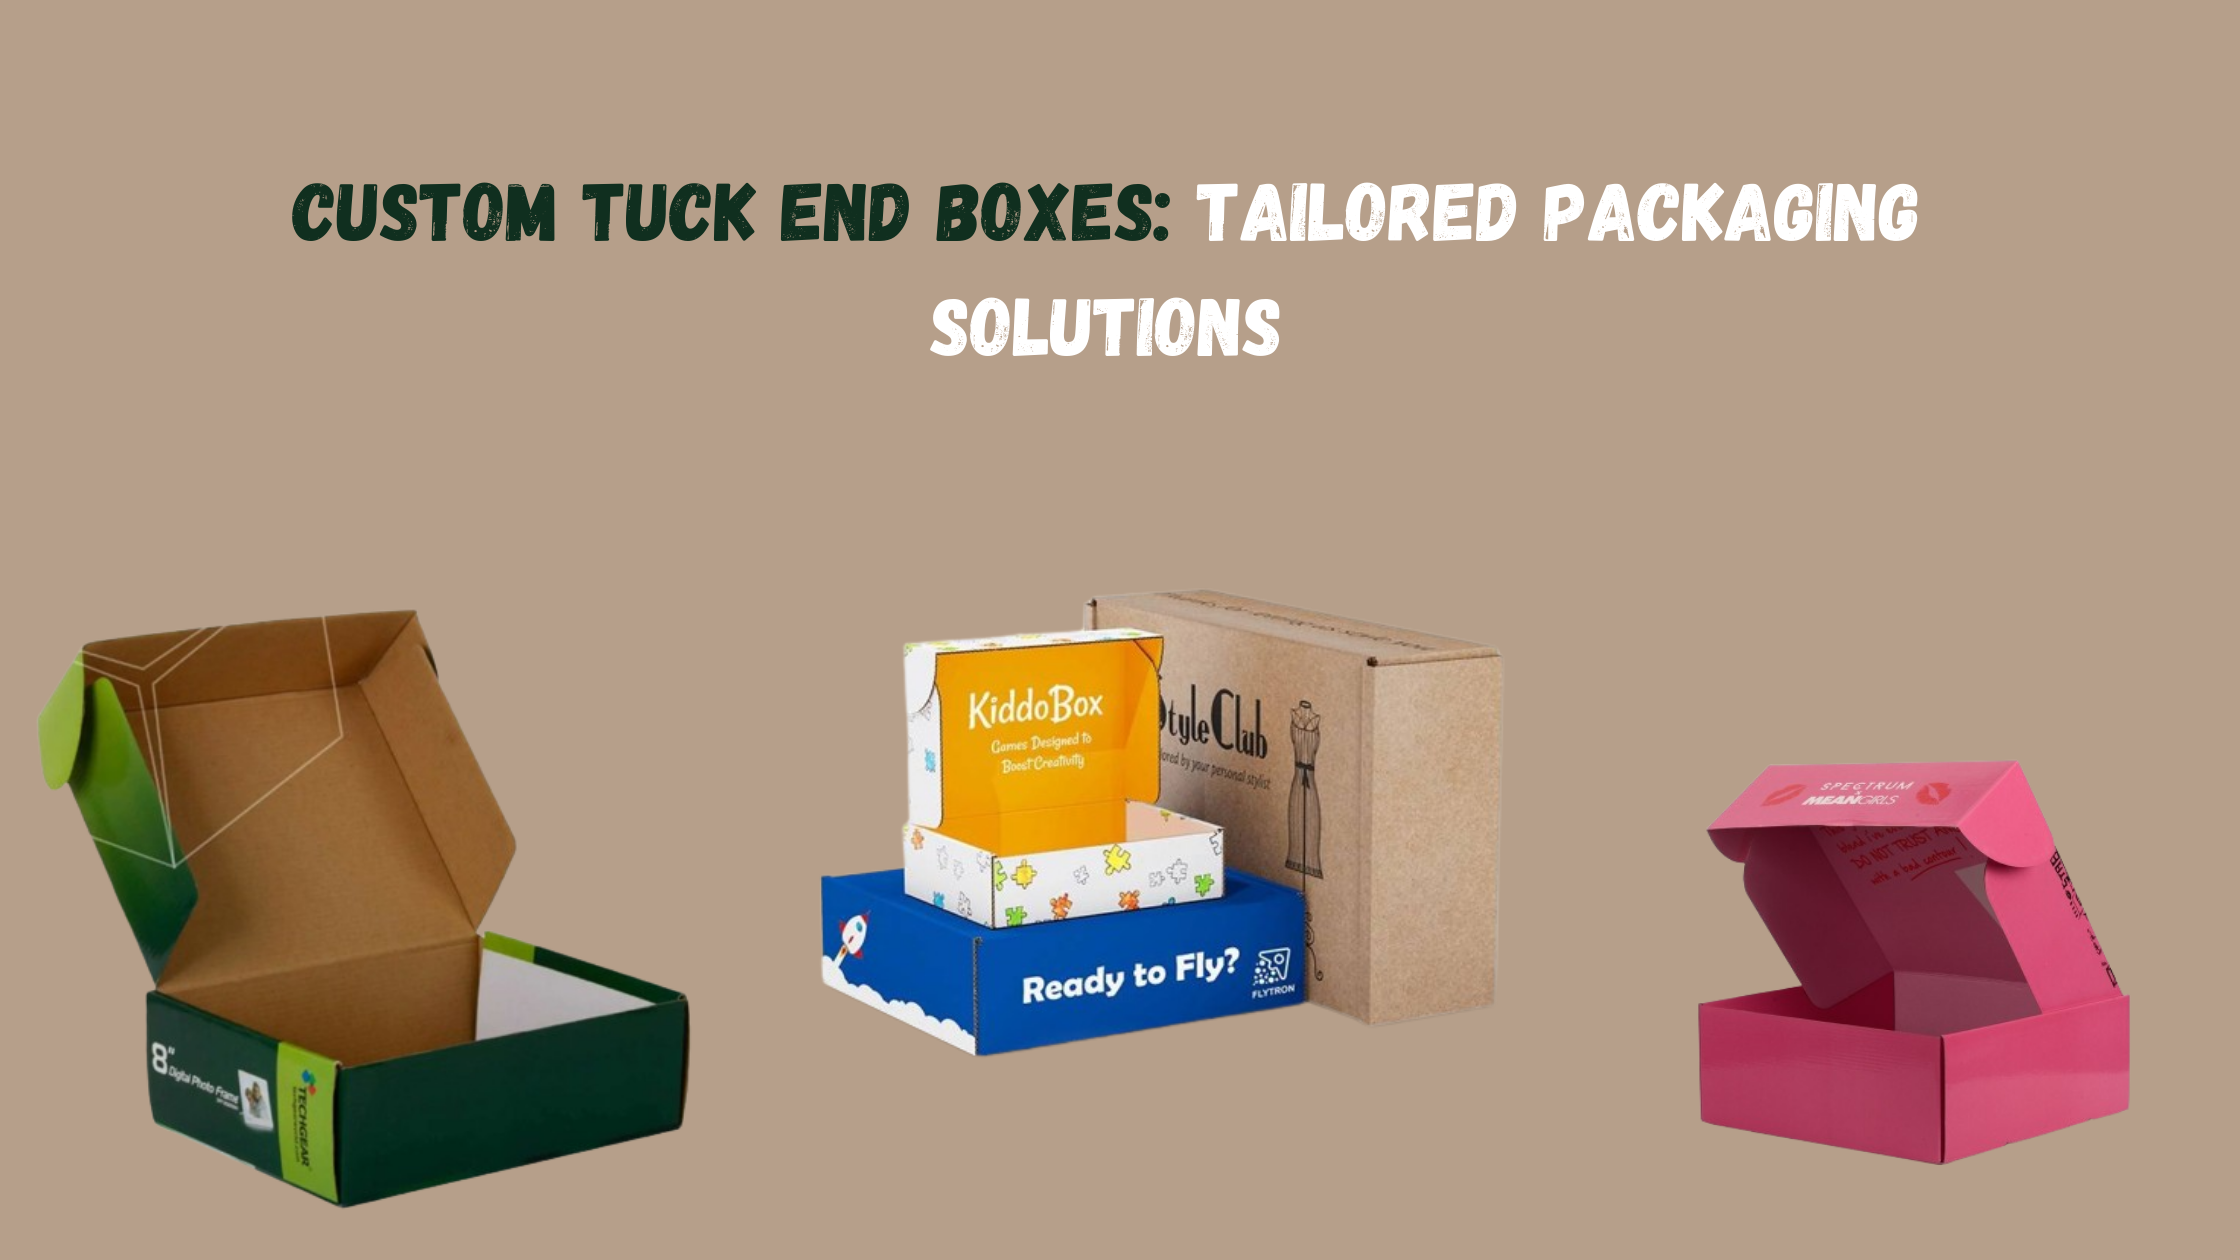 Custom Tuck End Boxes Tailored Packaging Solutions